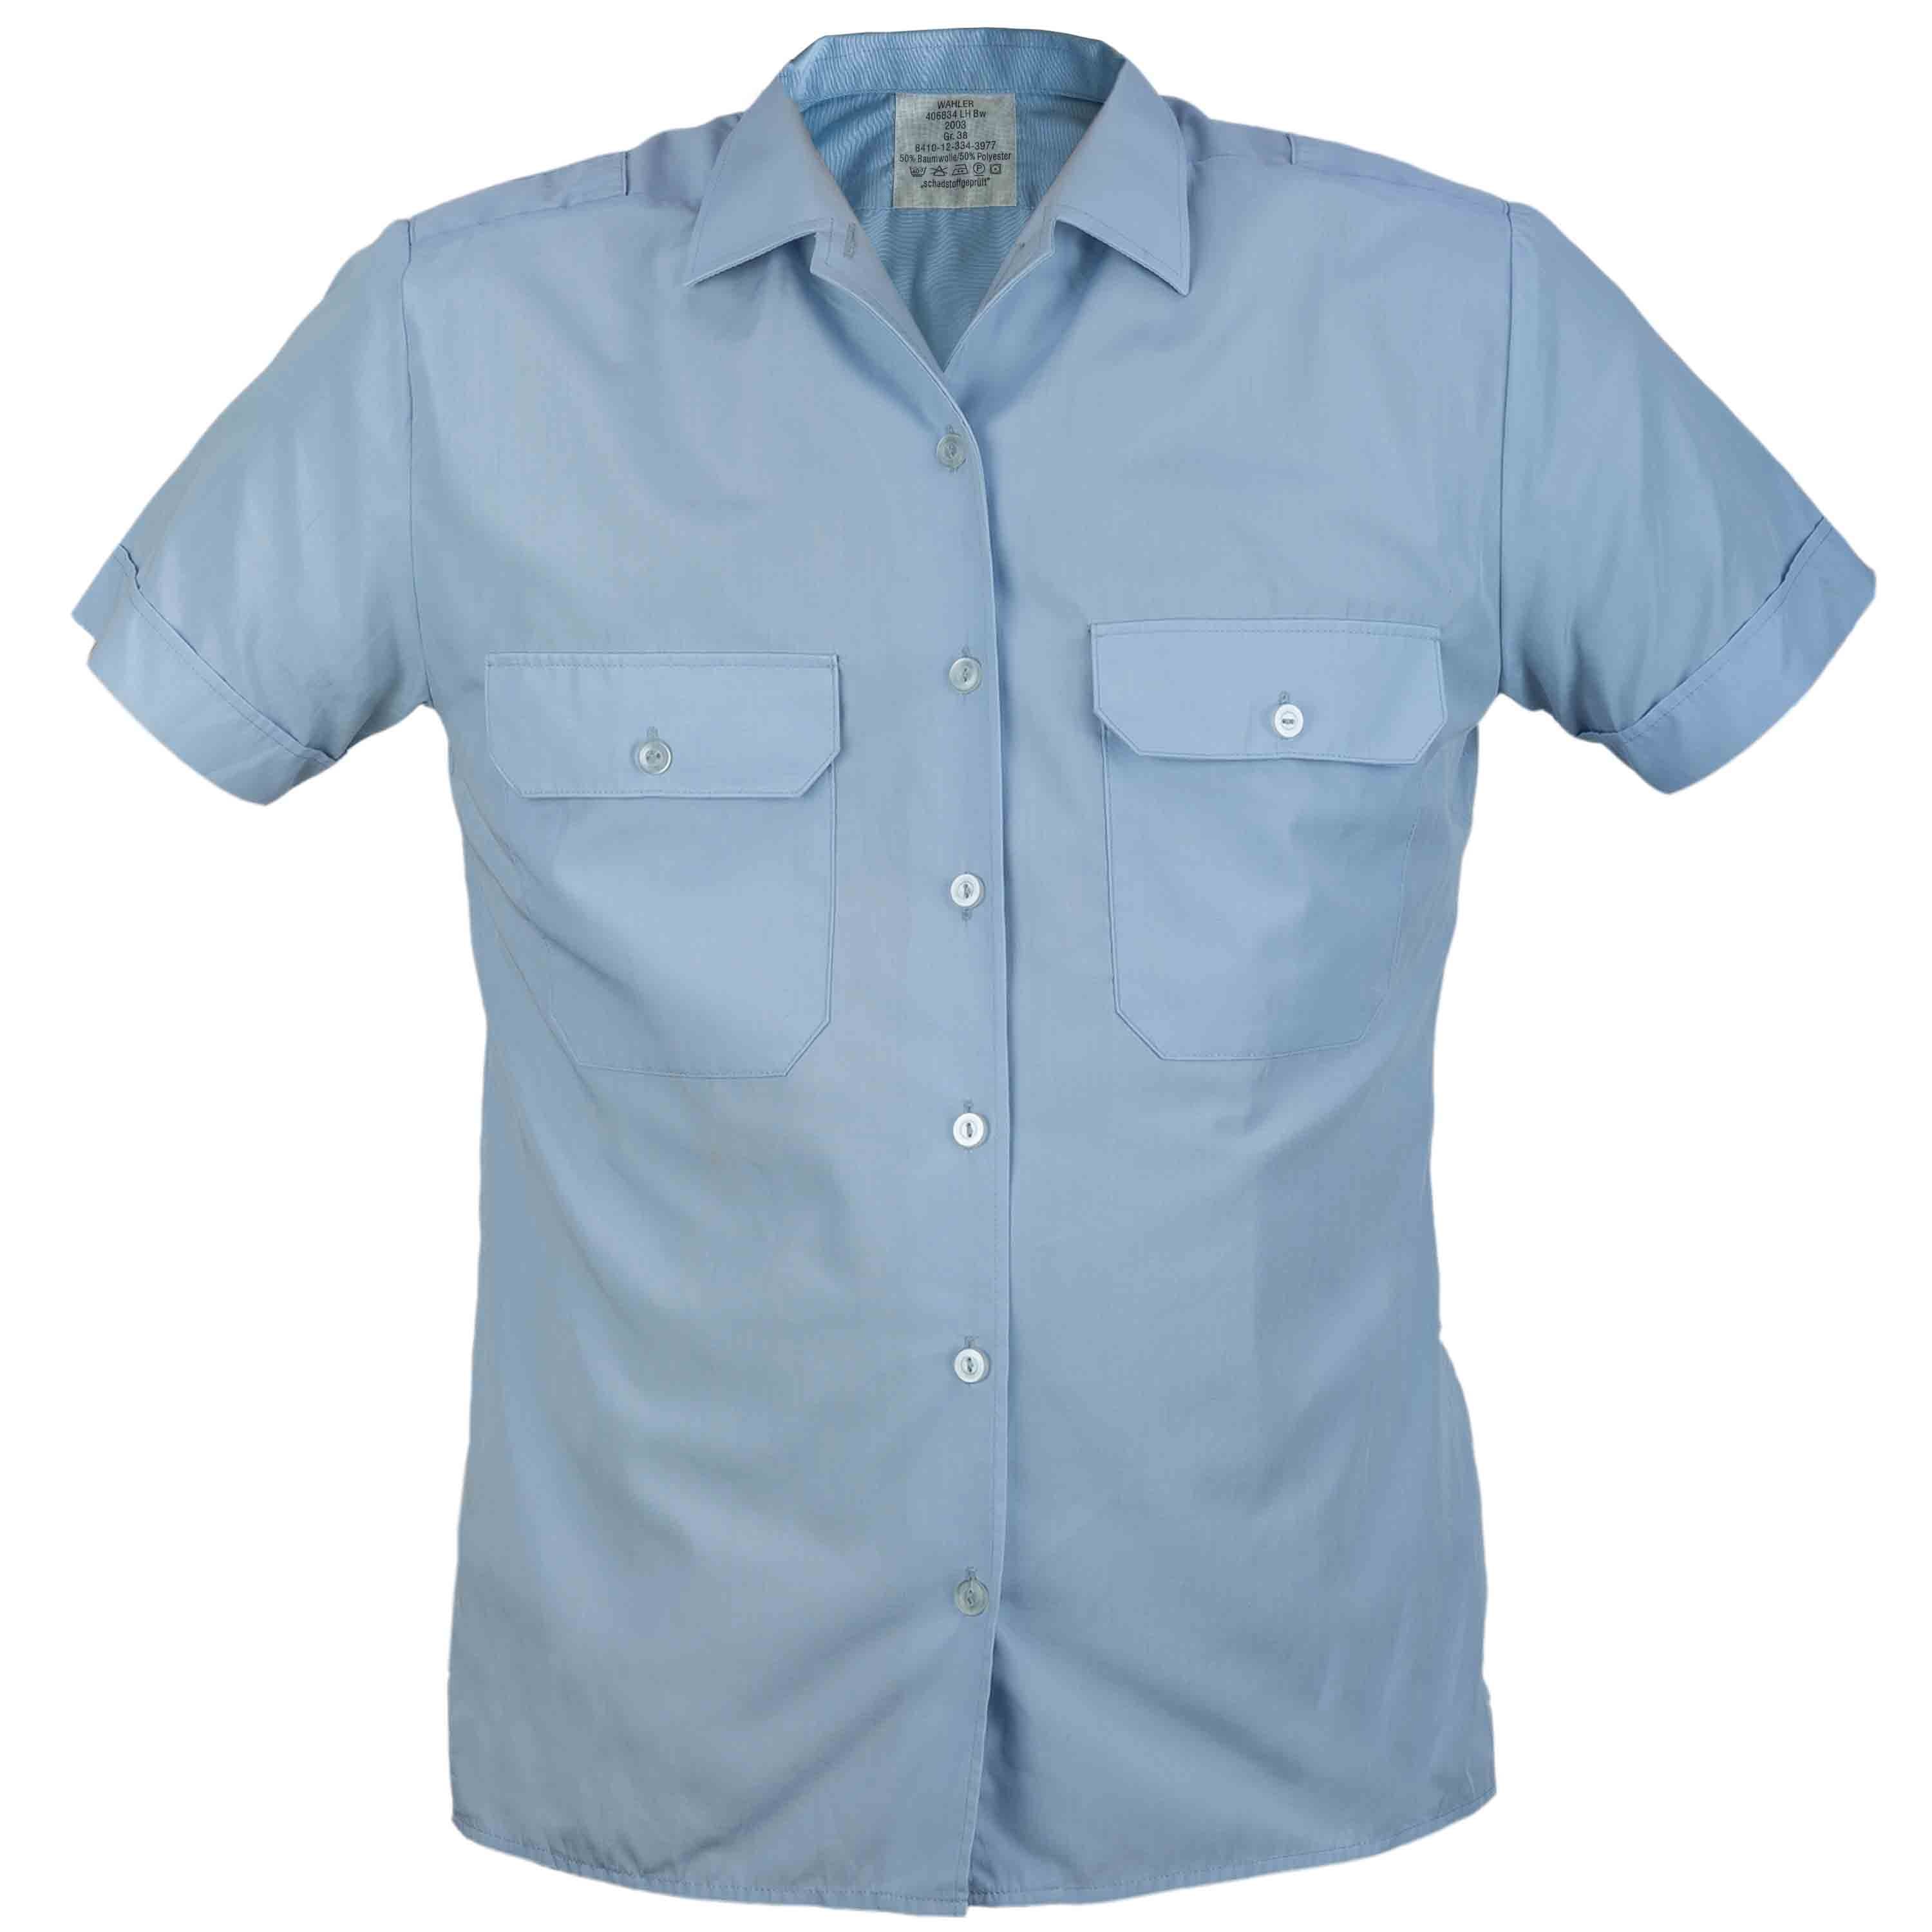 Purchase the Used Women's BW Duty Shirt blue by ASMC